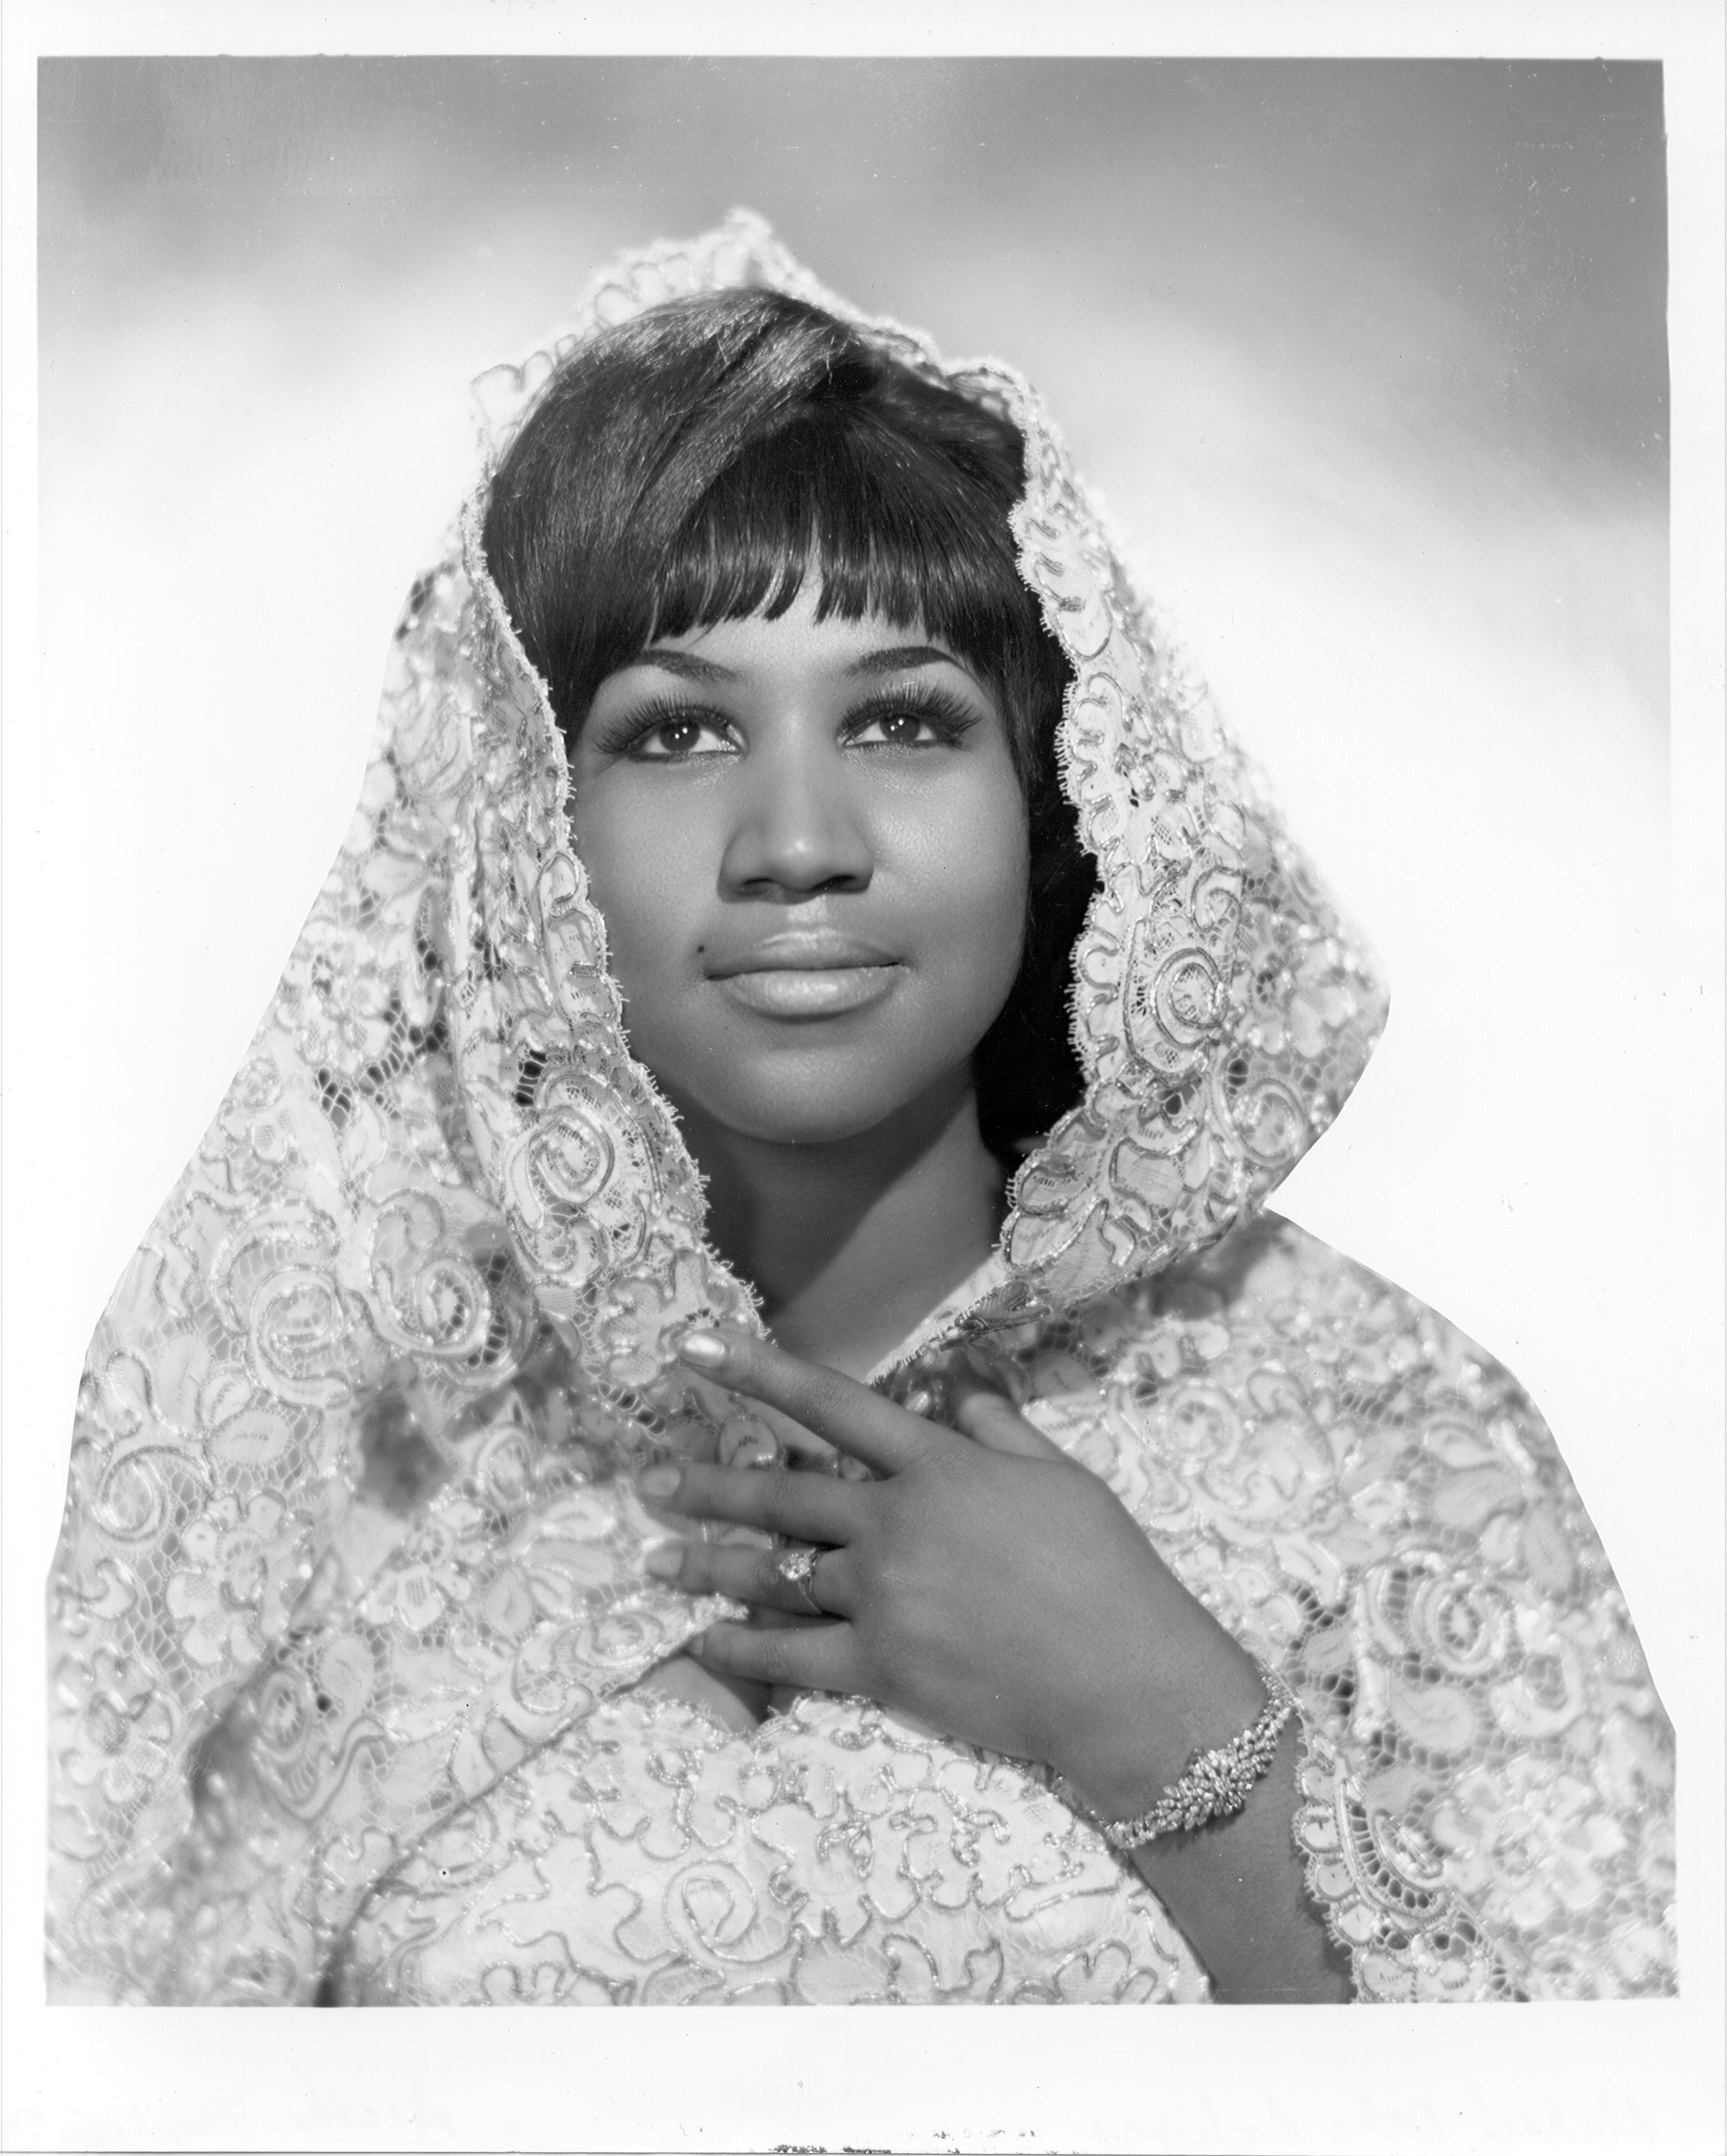 The Official Six-Hour Program For Aretha Franklin's Funeral Is Out!